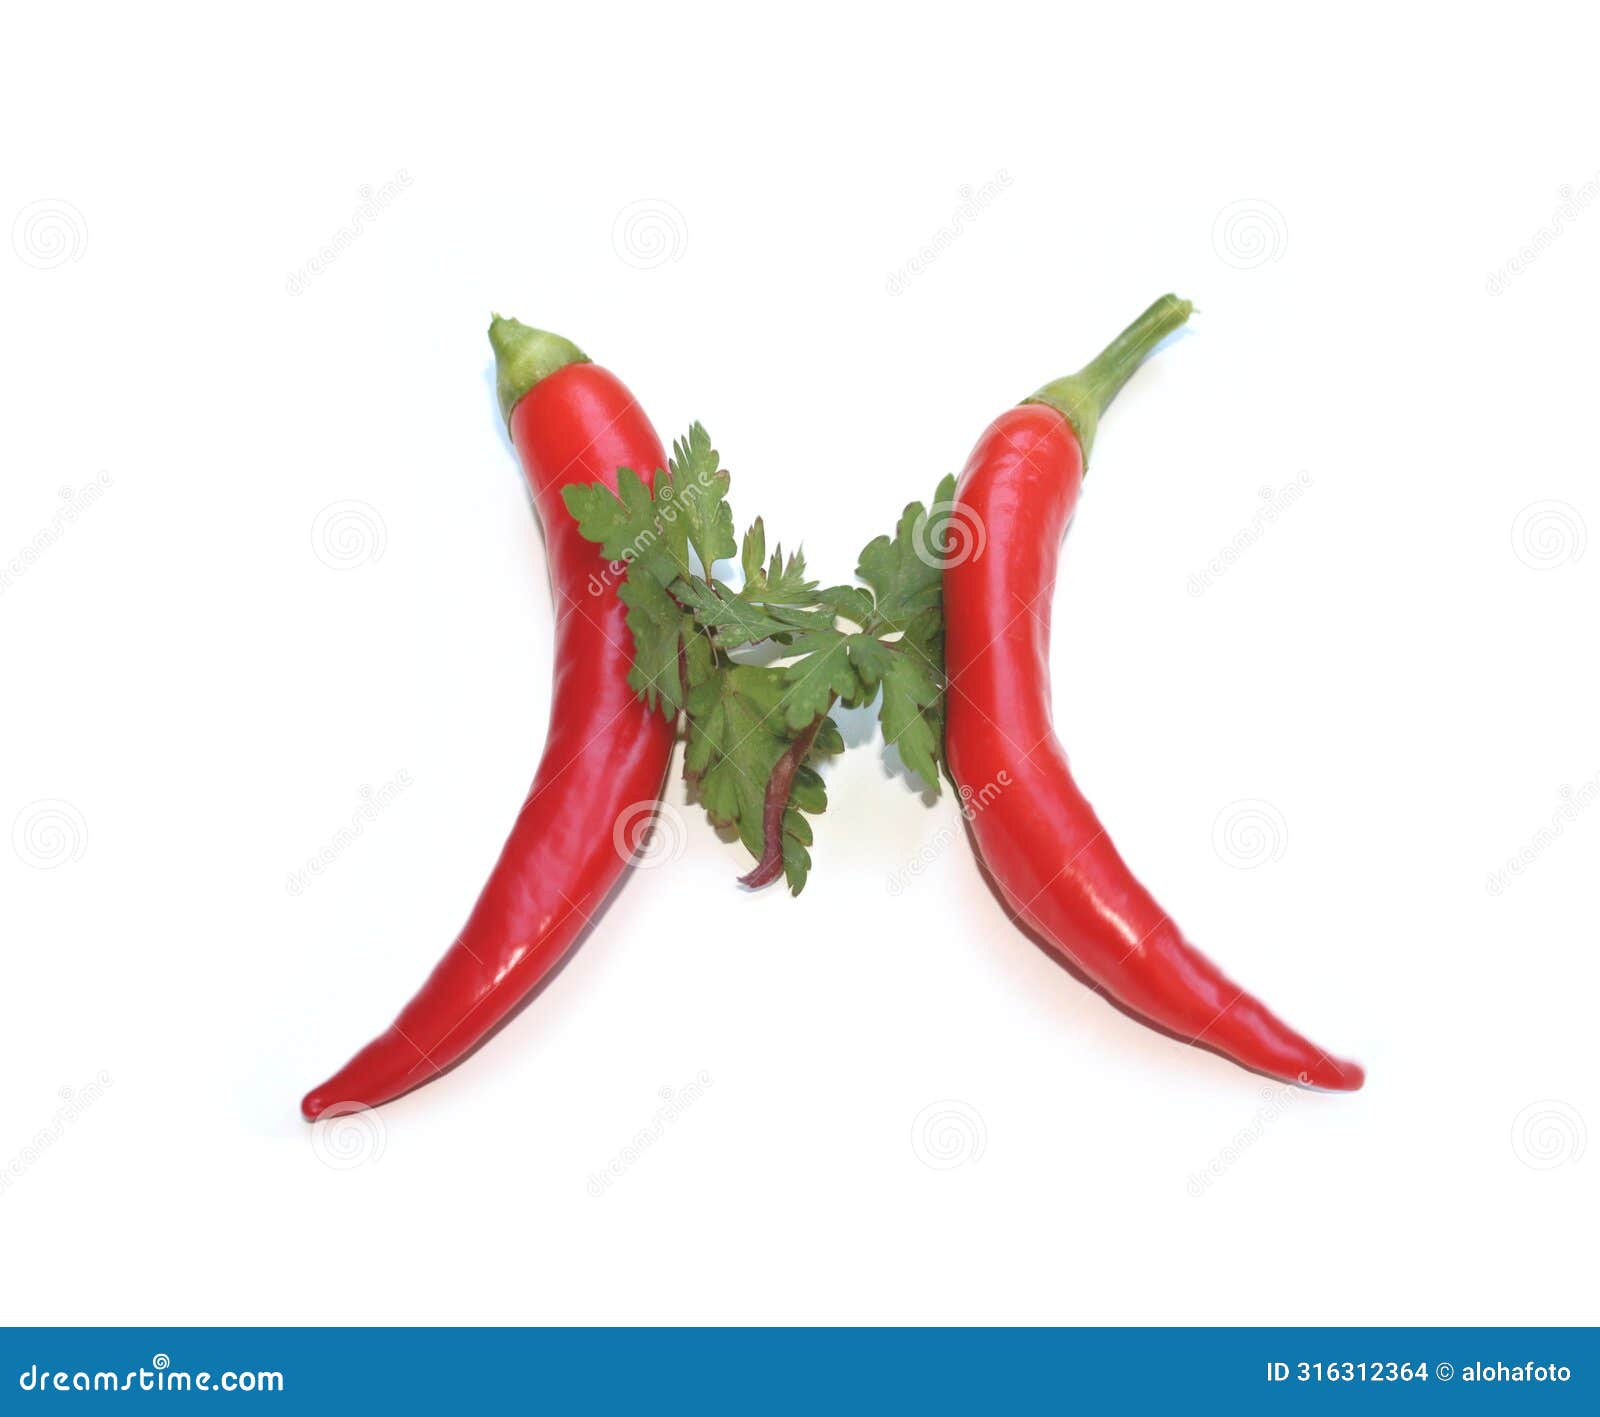 letter m from red chili pepper and green parsley, herbs letter for recipe